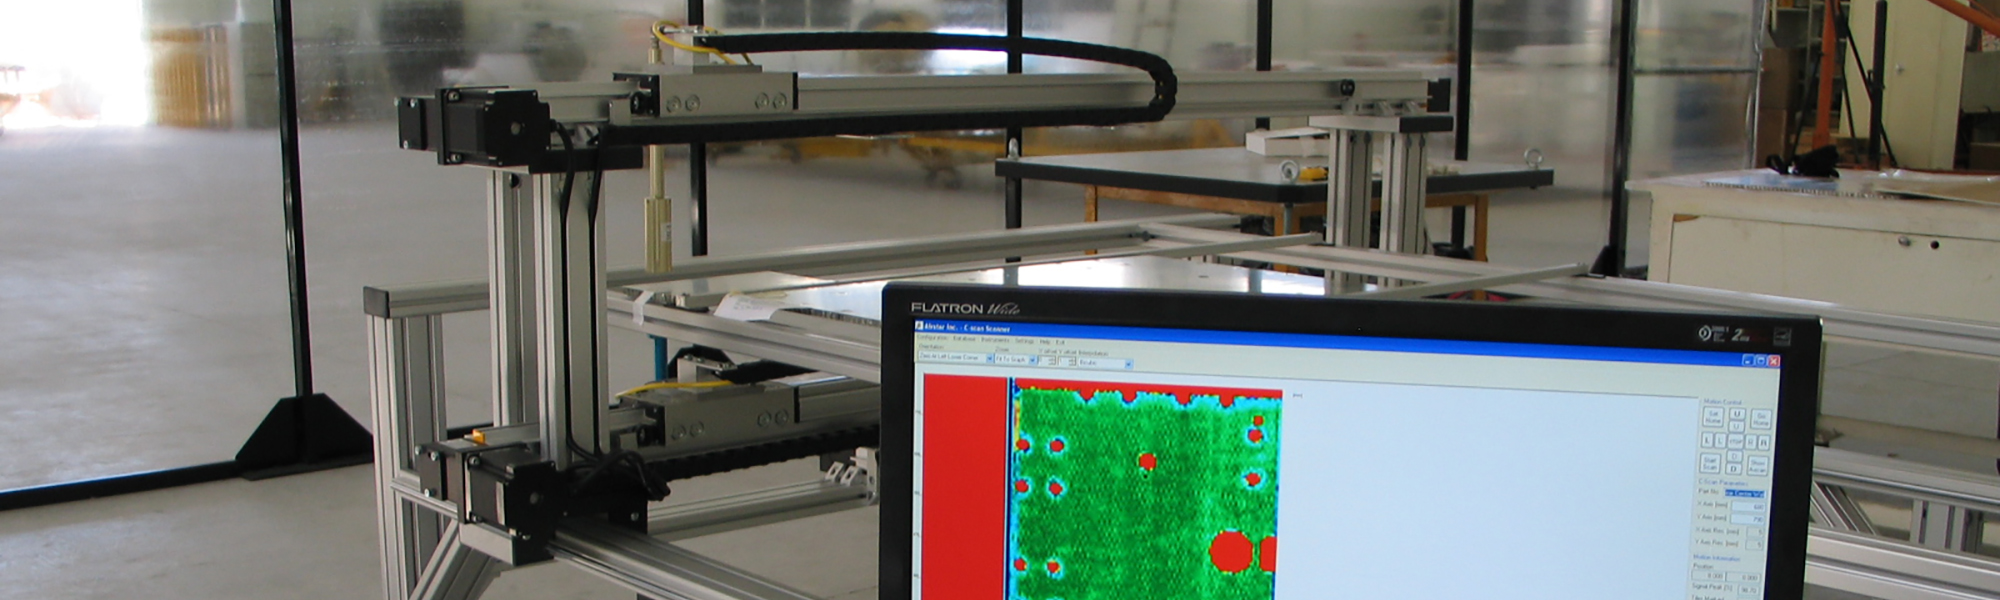 C-SCAN systems for composite materials